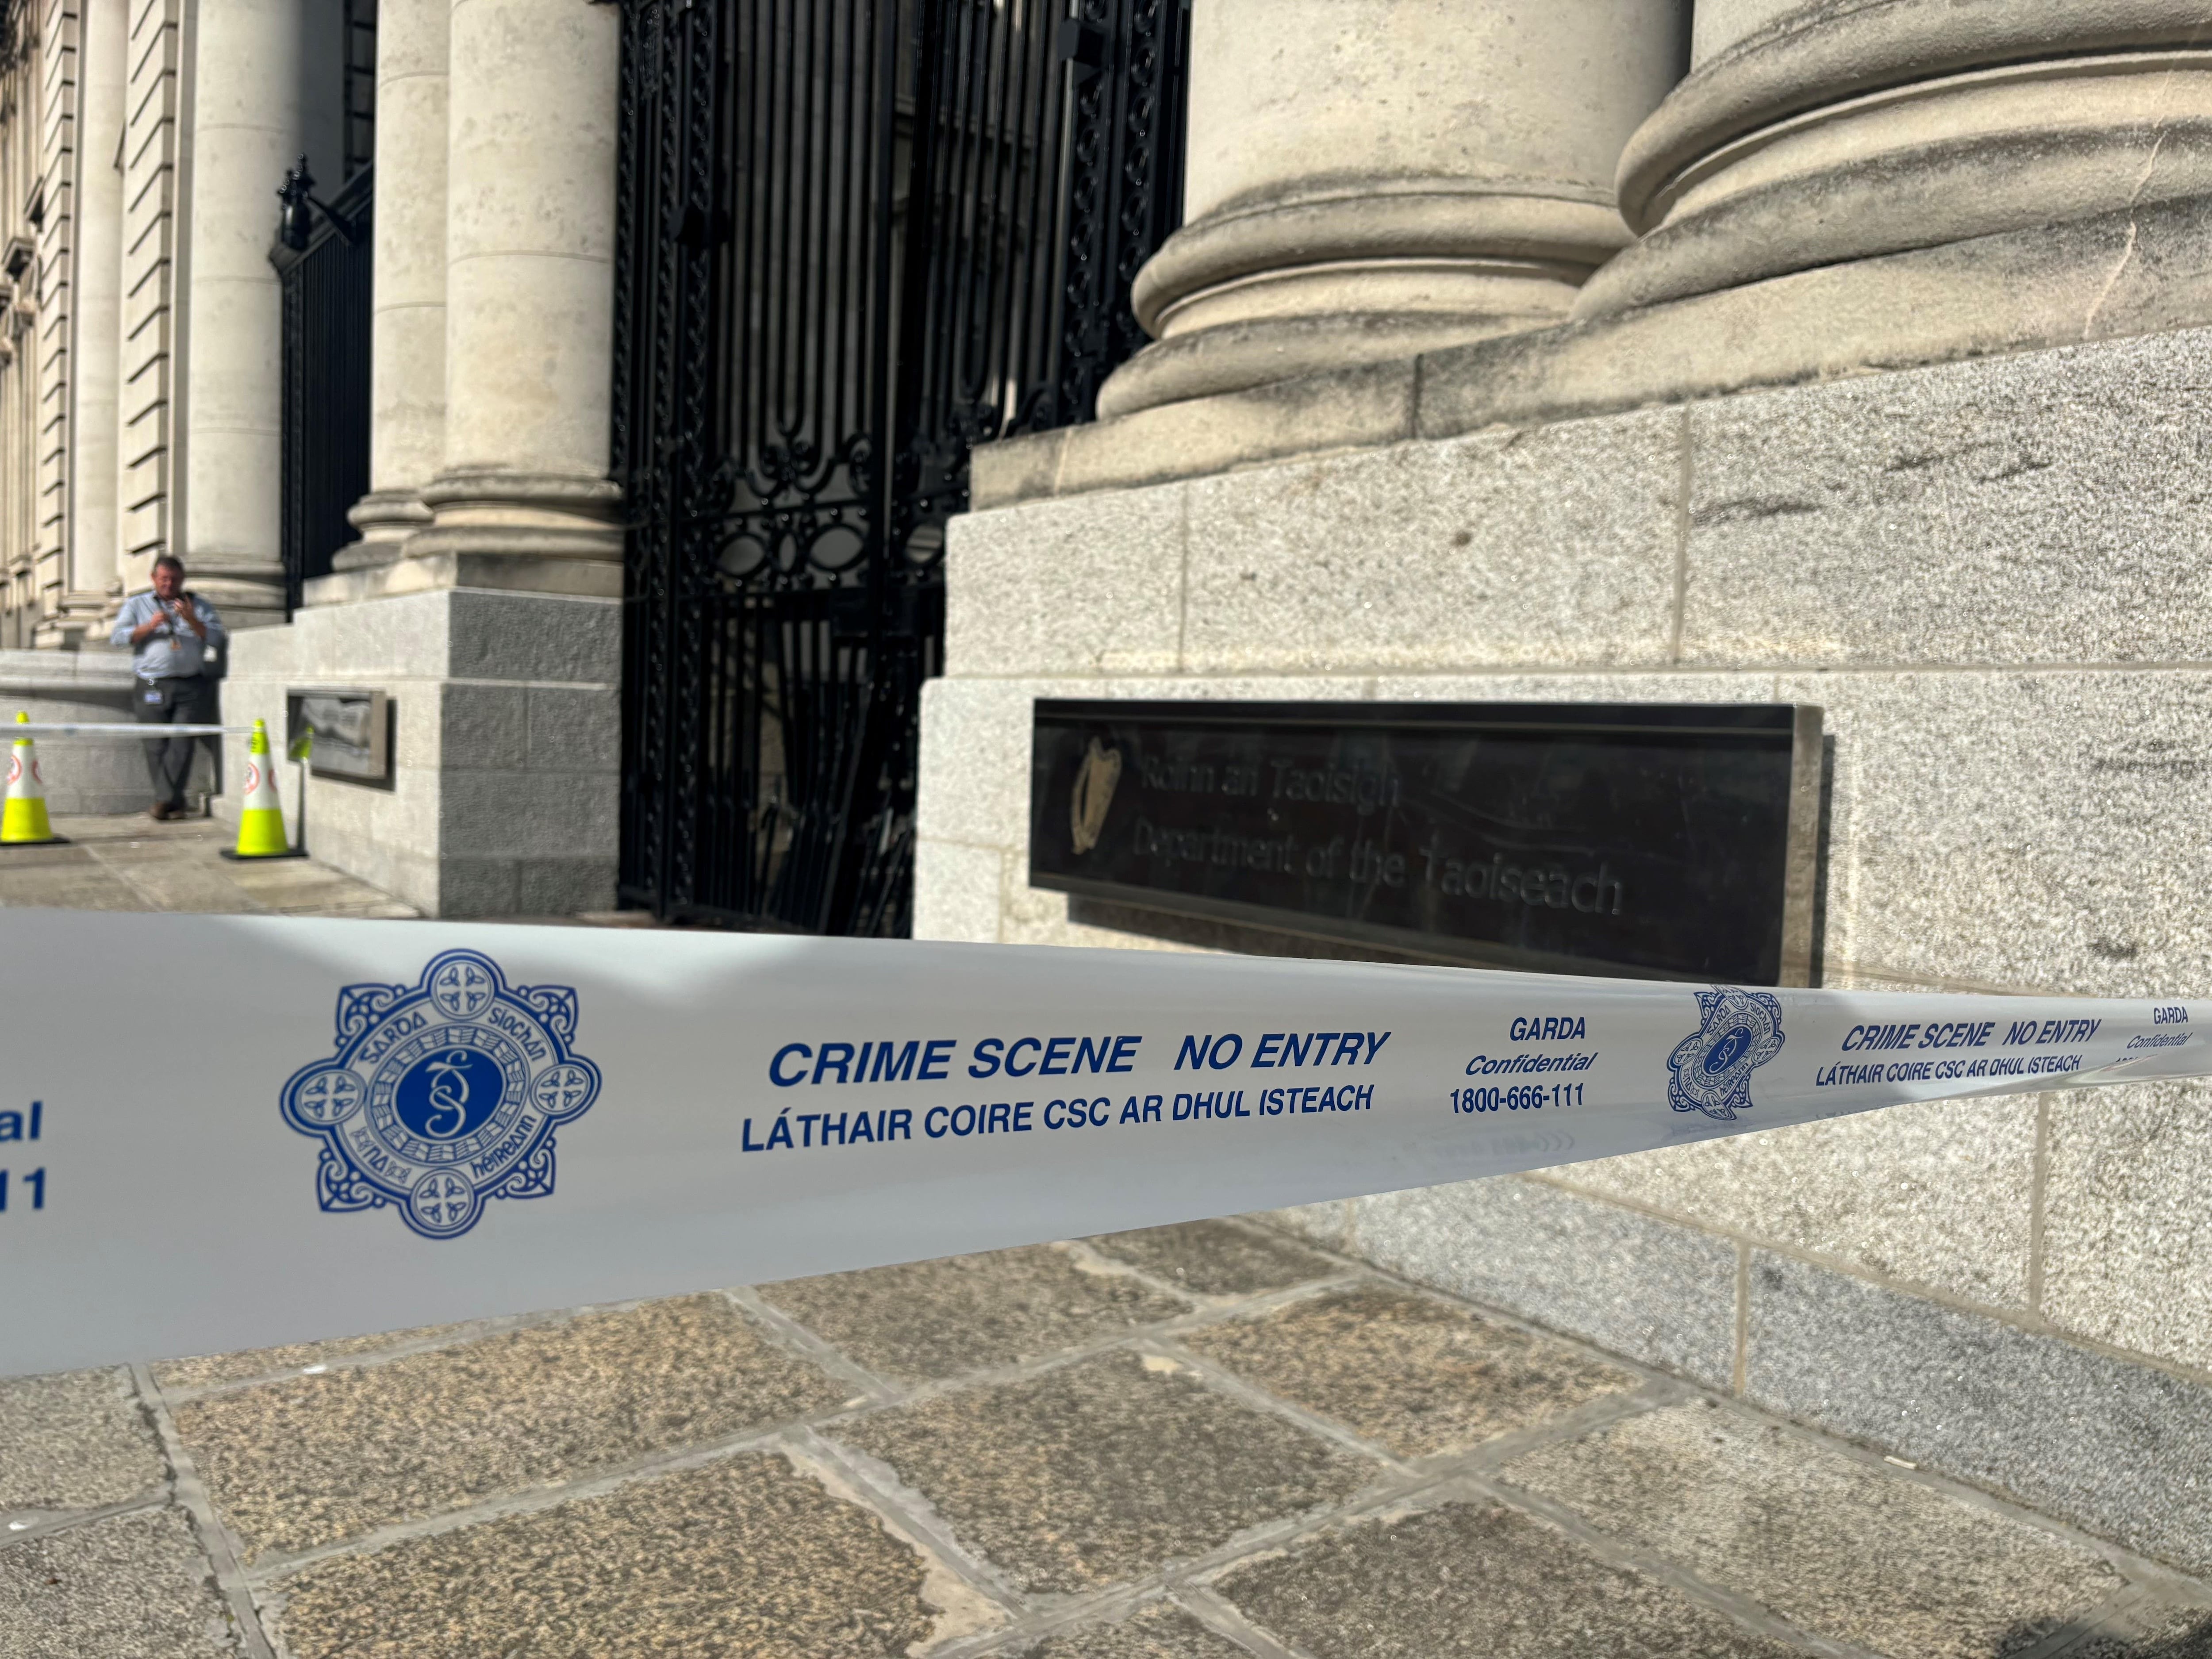 Man to face court after state buildings in Dublin targeted in ramming incidents